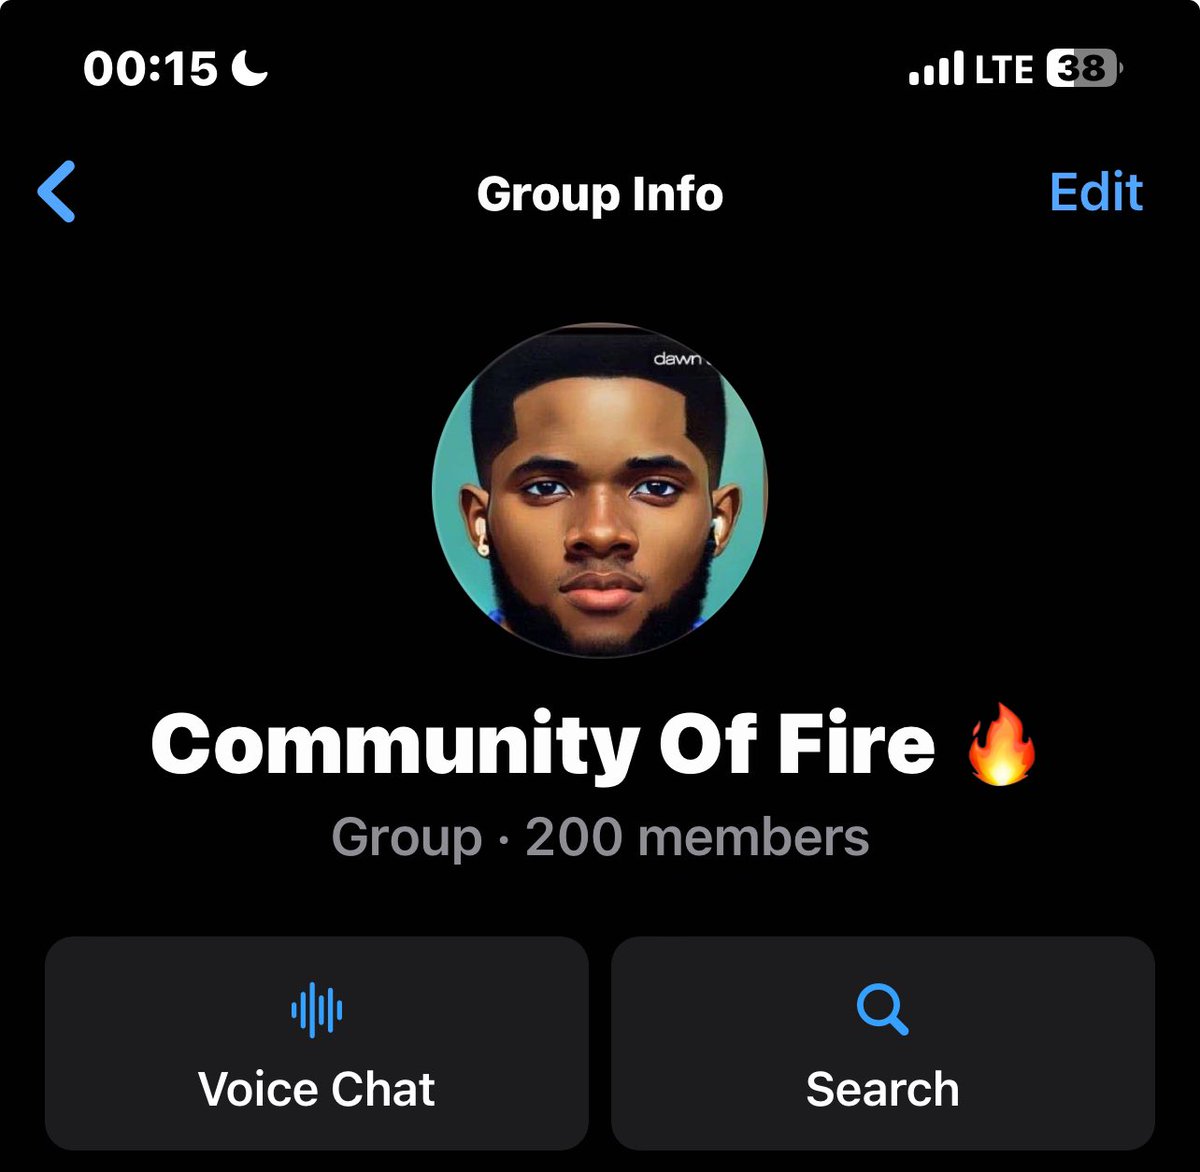 If you haven’t joined the community of fire then you’re missing out. If you’re struggling to grow spiritually then I gat you covered. Here: chat.whatsapp.com/FdSHY9x4aP154l…